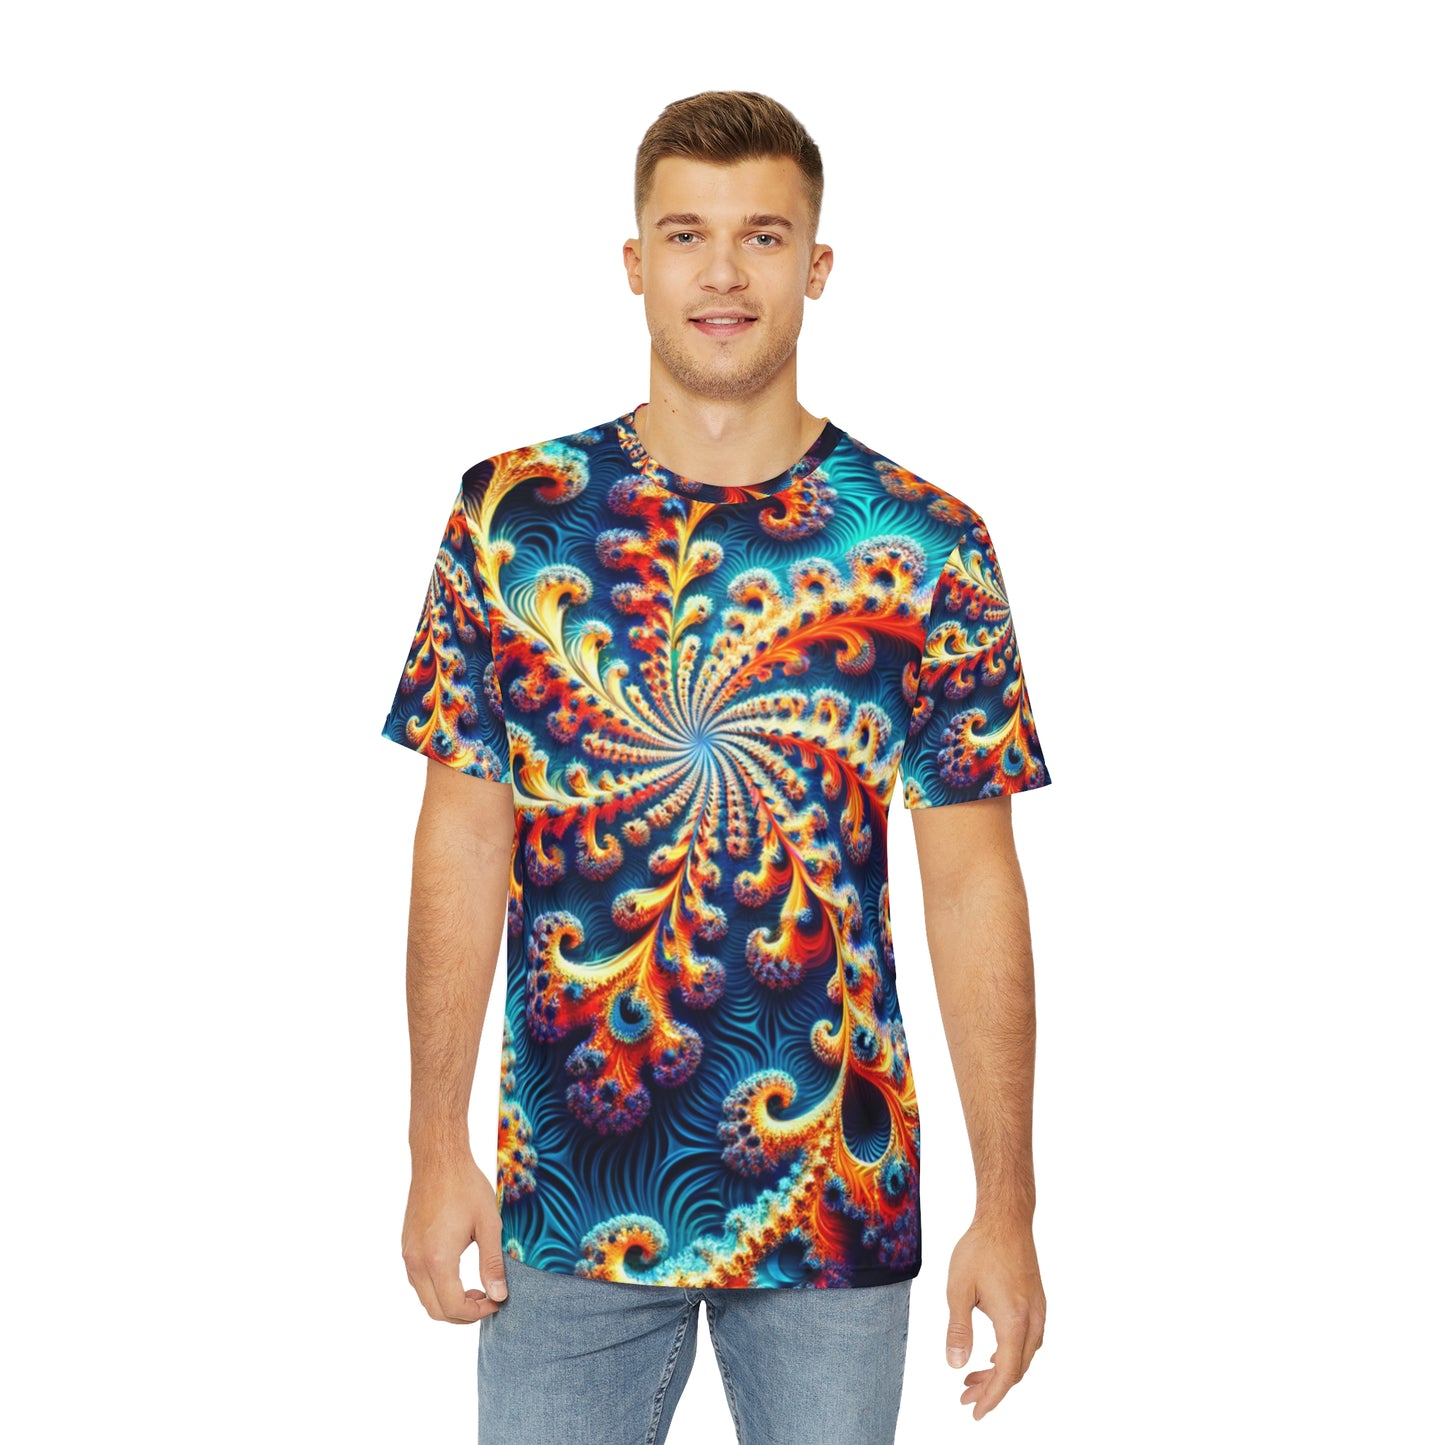 Front view of the Iridescent Nautilus Swirls Crewneck Pullover All-Over Print Short-Sleeved Shirt blue red yellow orange green swirl pattern paired with casual denim pants worn by a white man